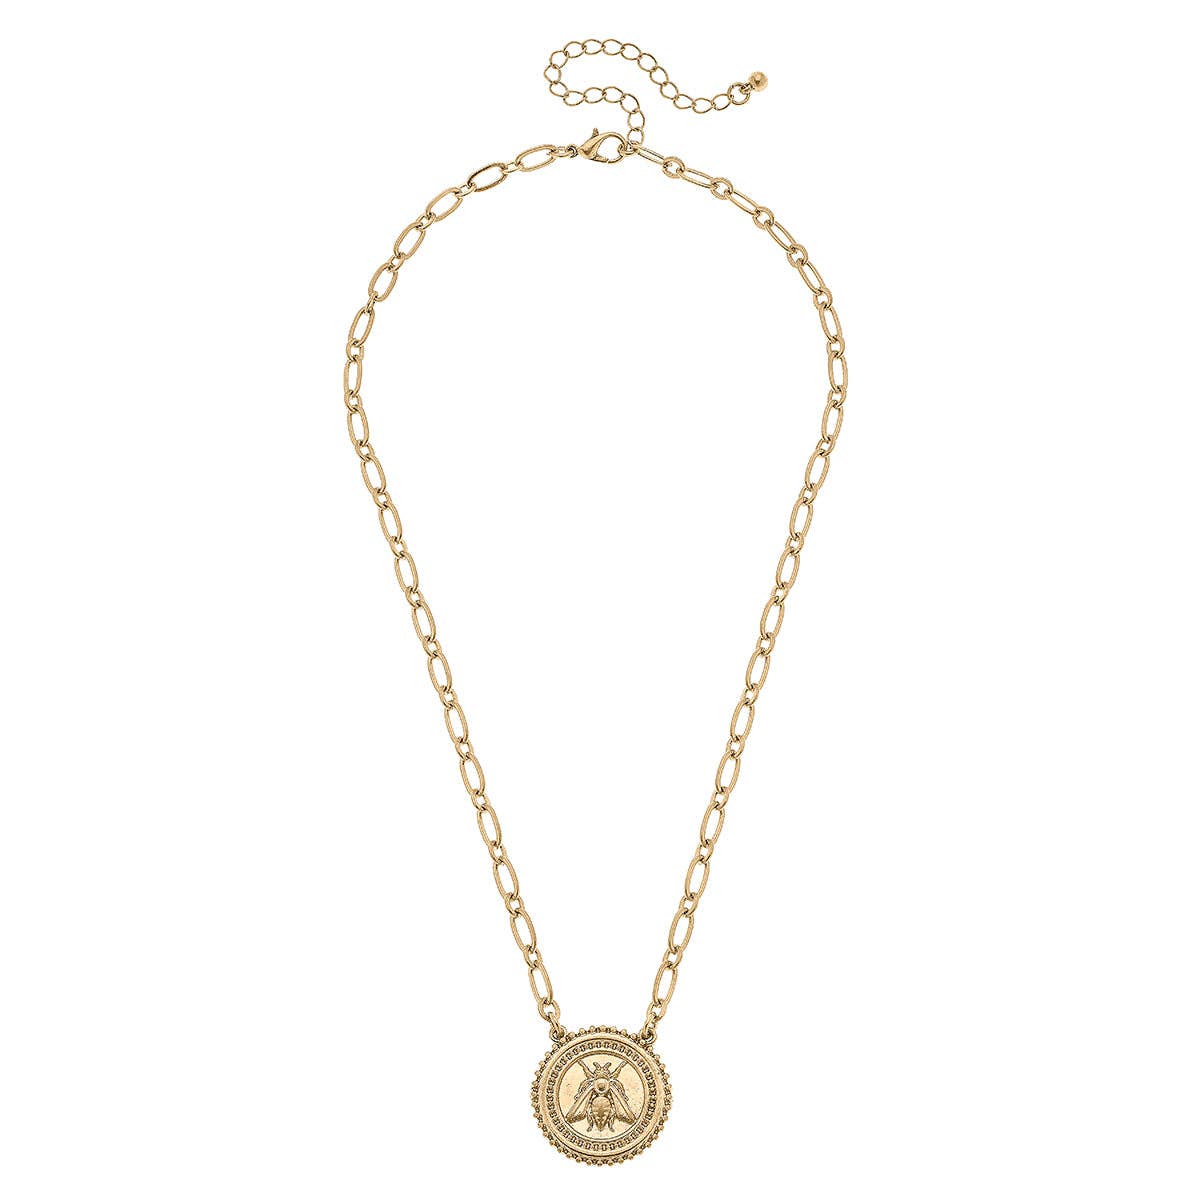 Nicolette Bee Medallion Pendant Necklace in Worn Gold